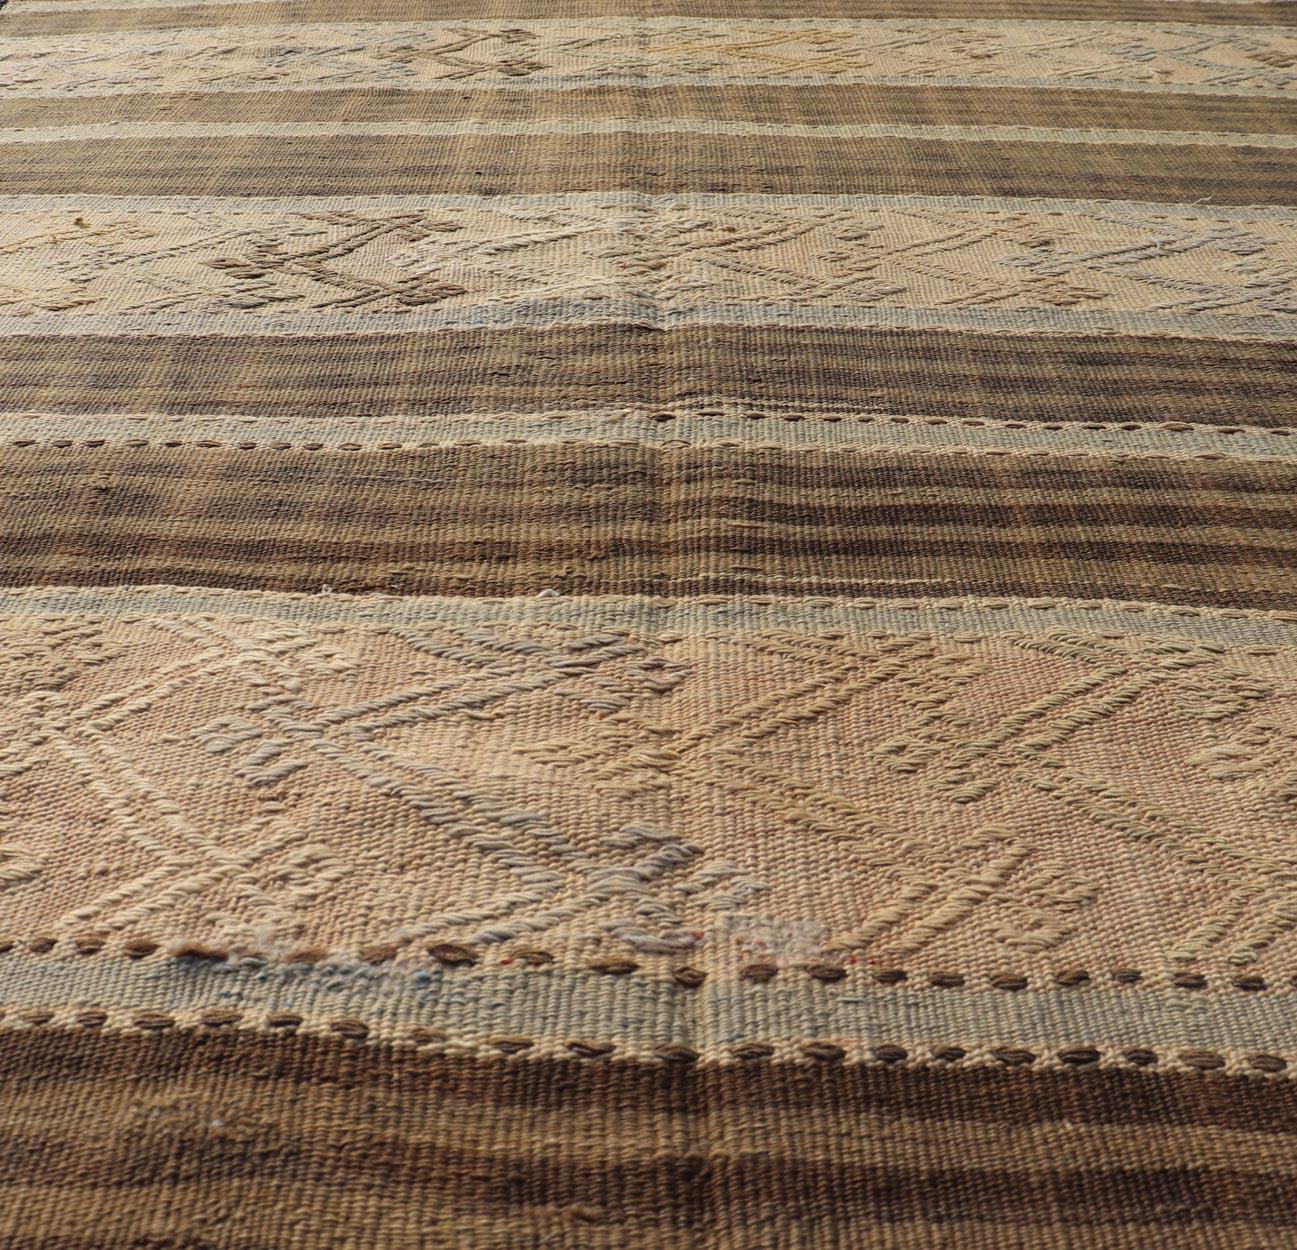 Vintage Turkish Flat-Weave Striped Kilim in Taupe, Brown, and Light Blue In Good Condition For Sale In Atlanta, GA